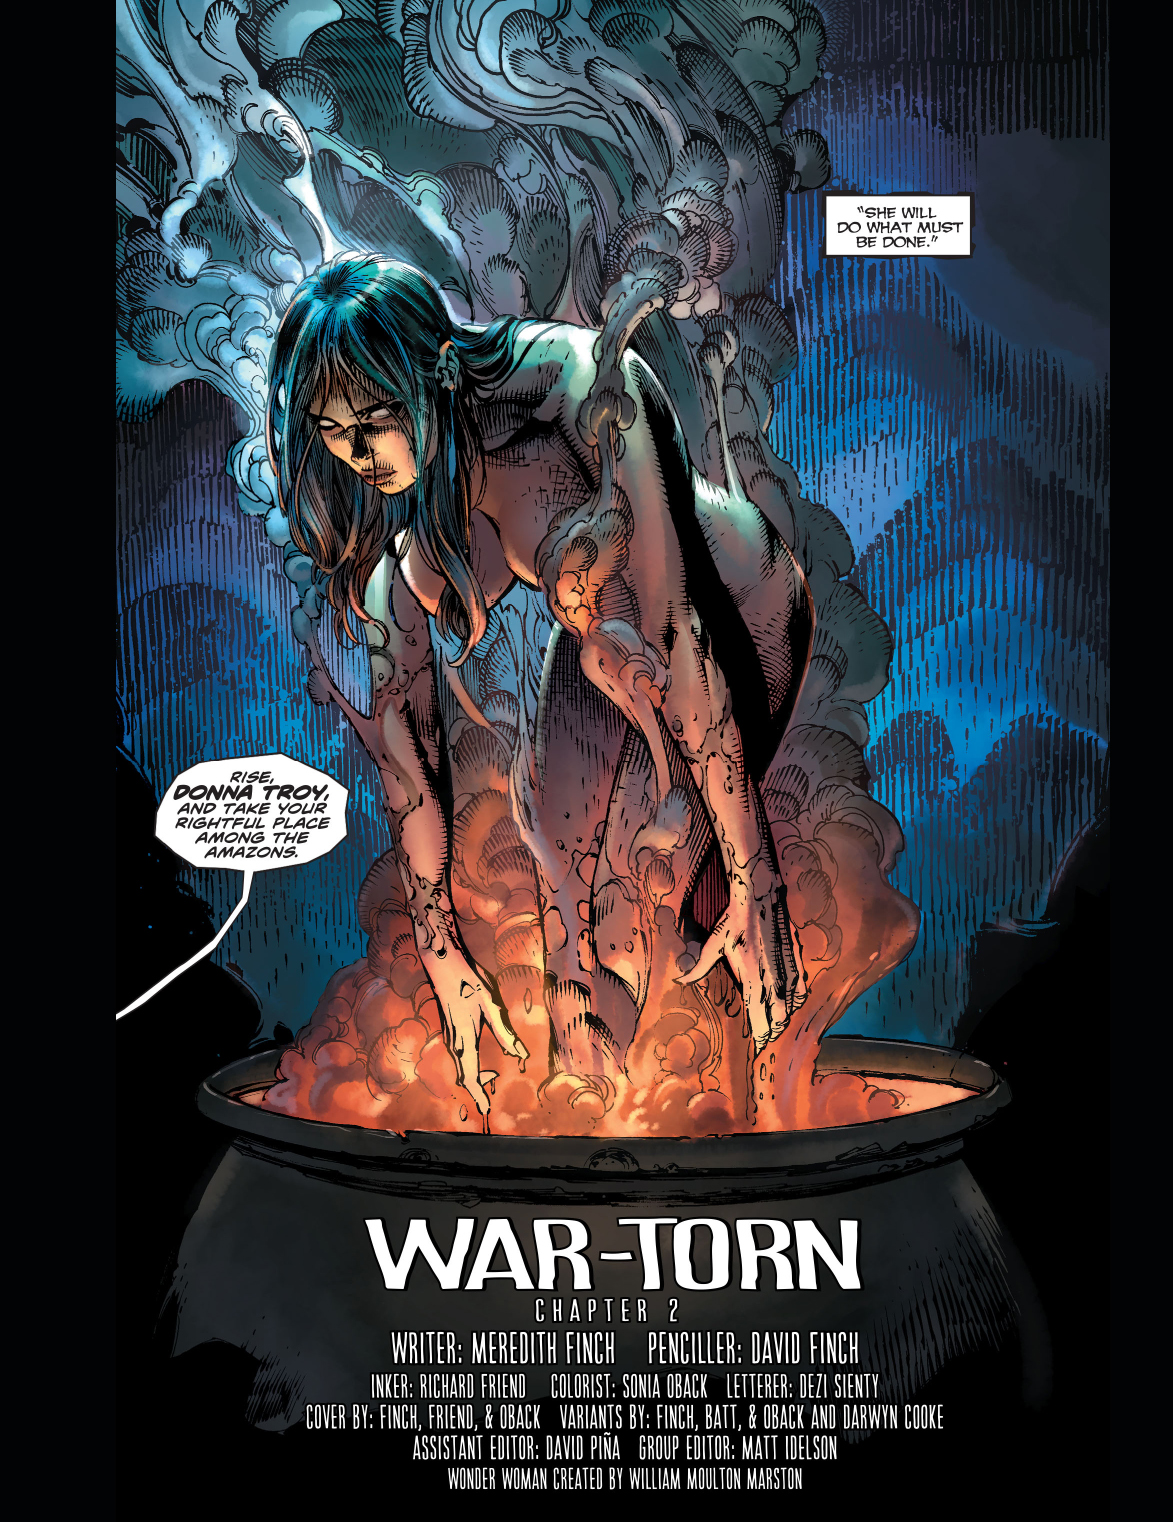 donna troy's first appearance (new 52)